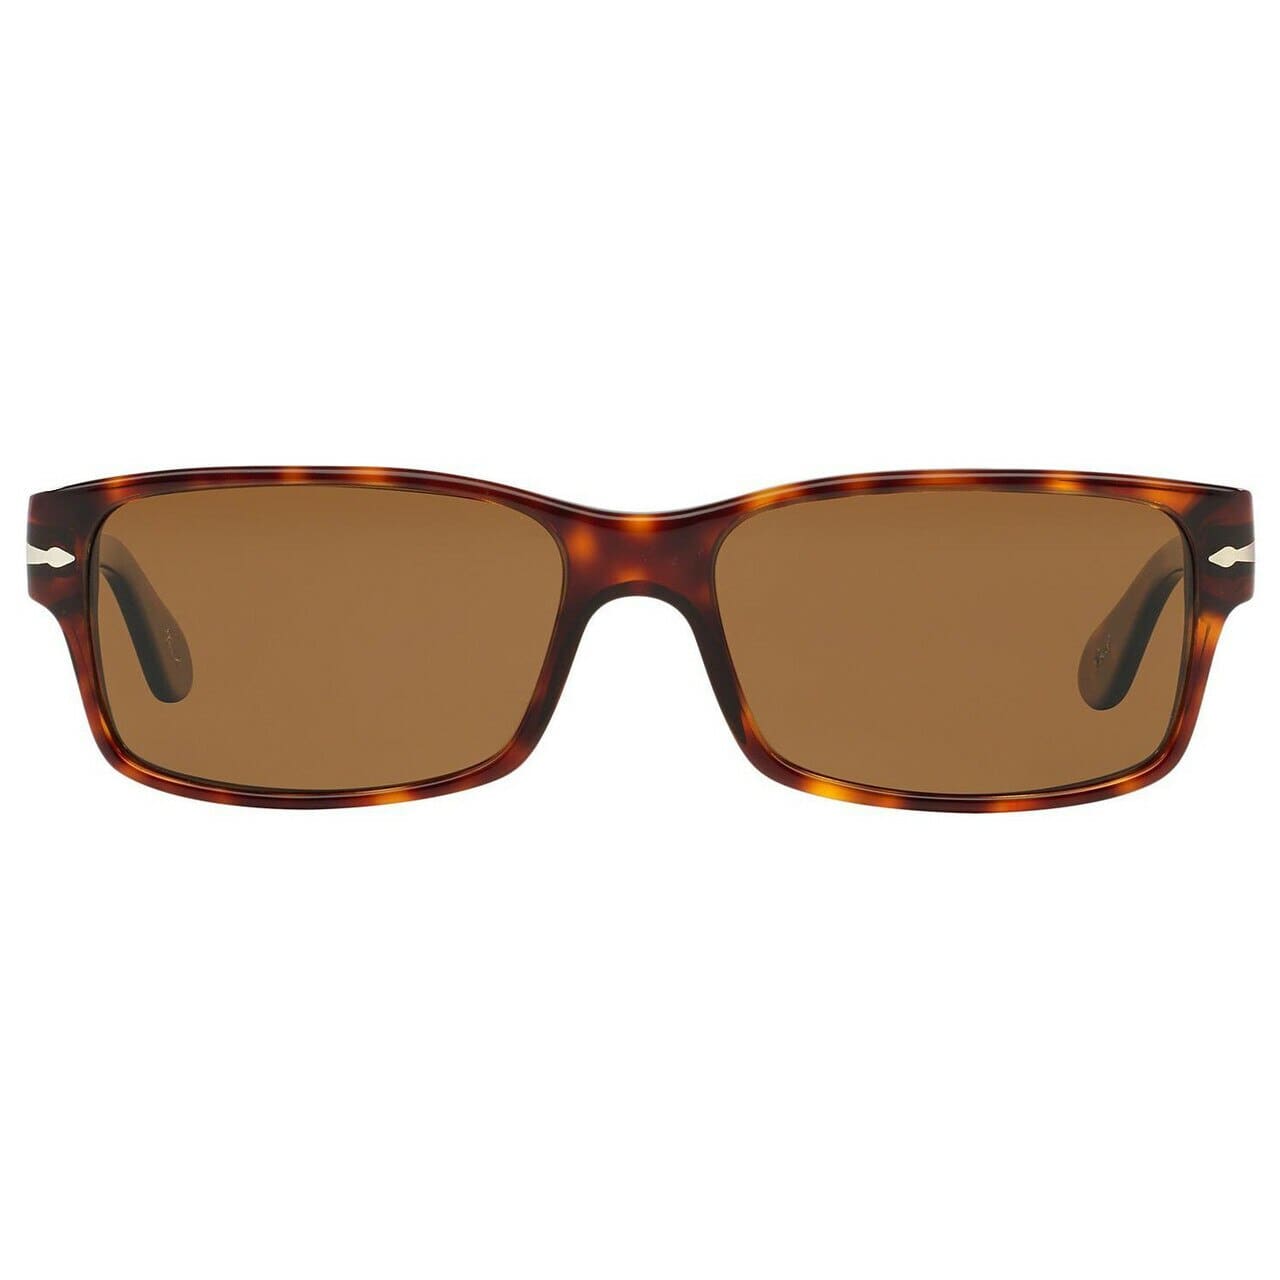 Persol PO2803S 24/57 Sunglasses Tortoise Brown Frame Crystal Brown Polarized Lens